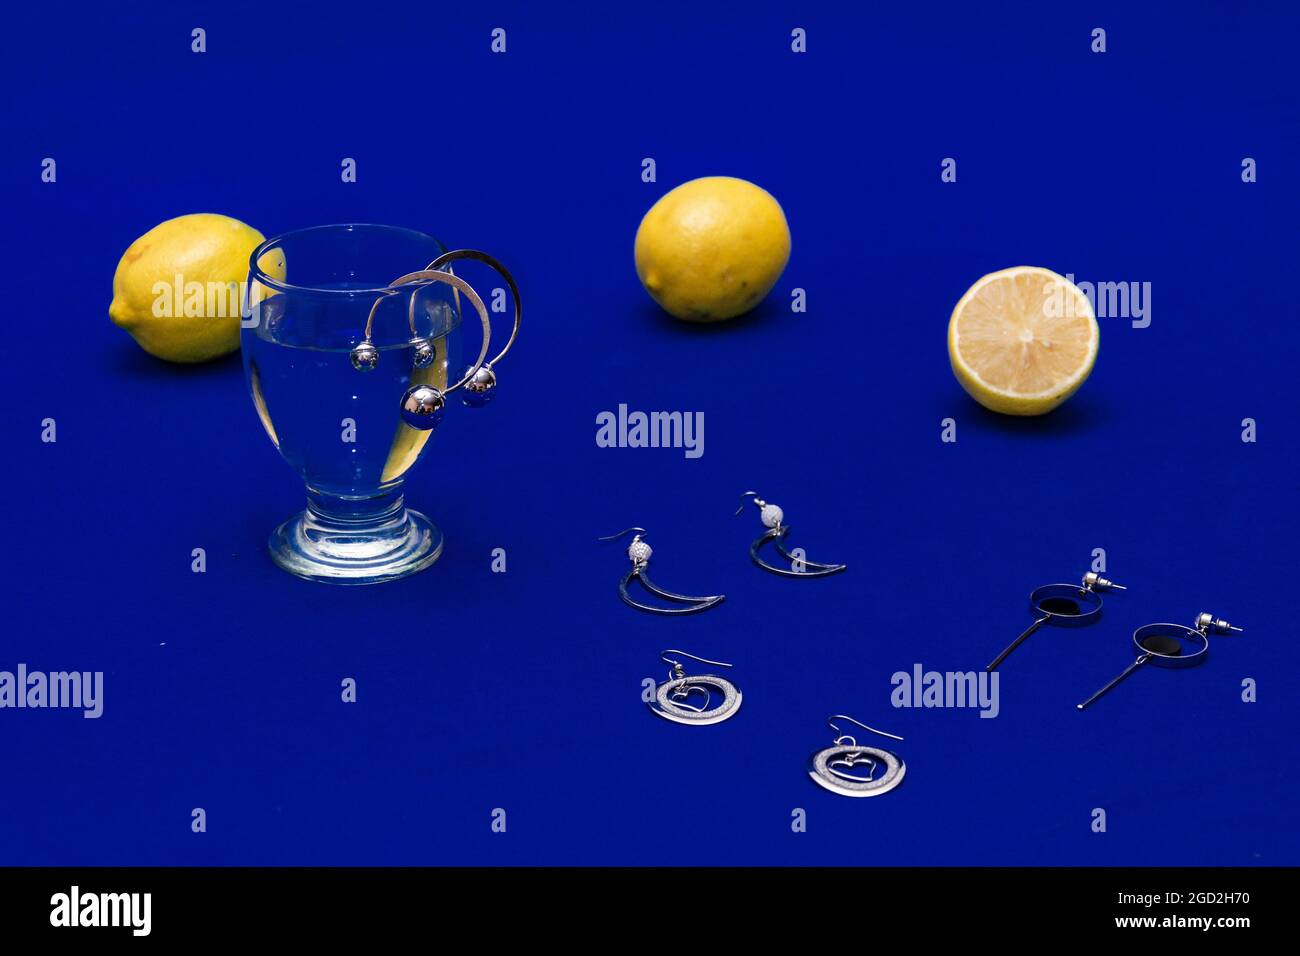 Pairs of silver earrings, a glass of water, and slices of lemon on a blue surface Stock Photo